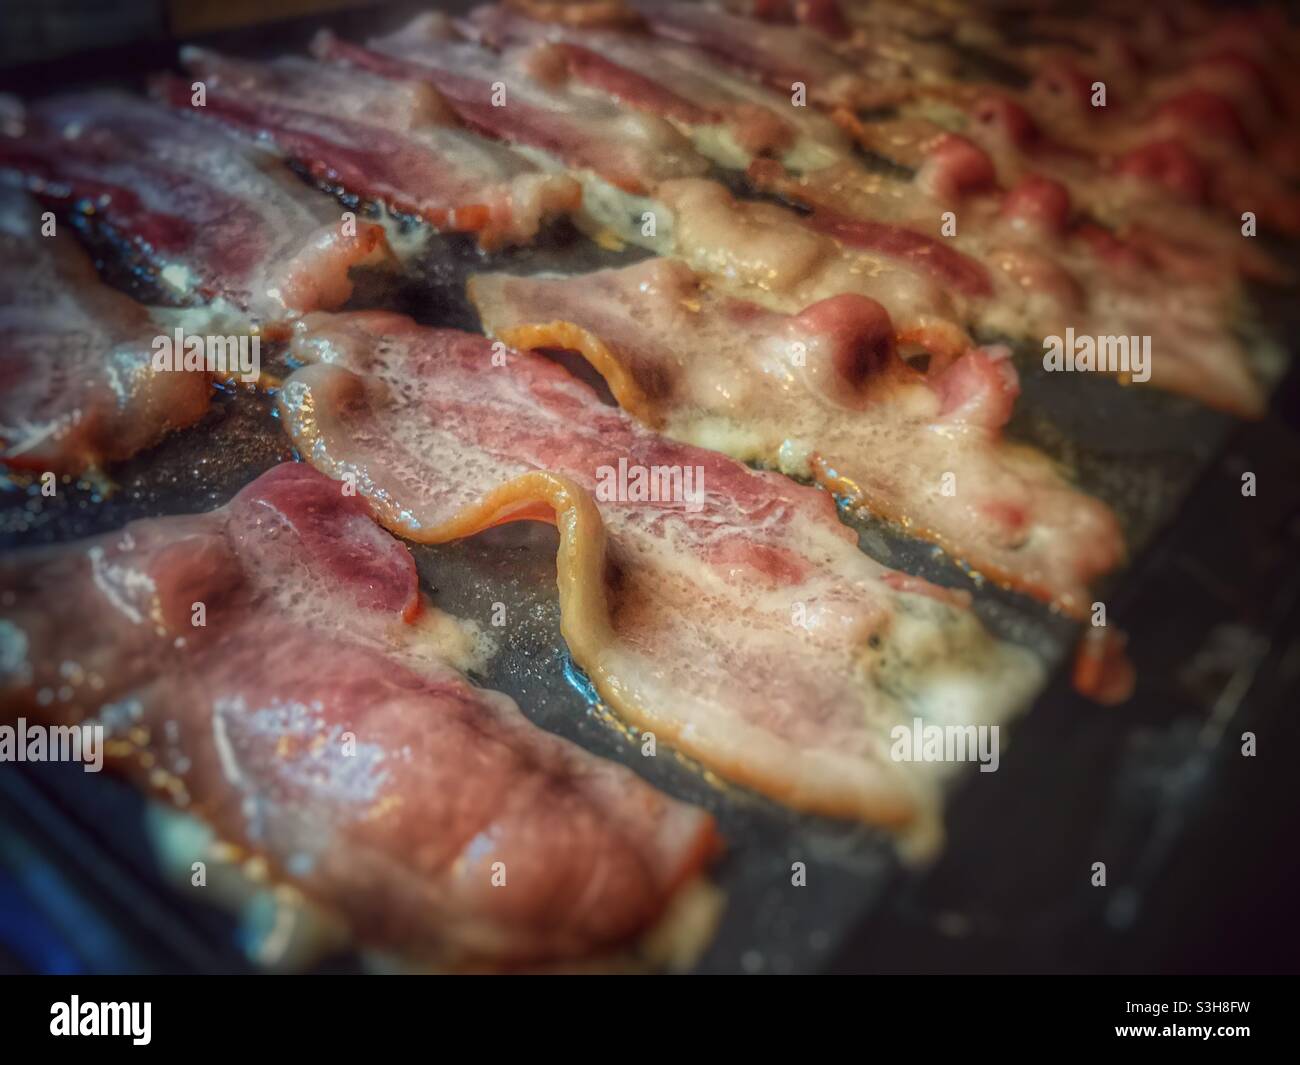 Bacon frying on an electric griddle Stock Photo